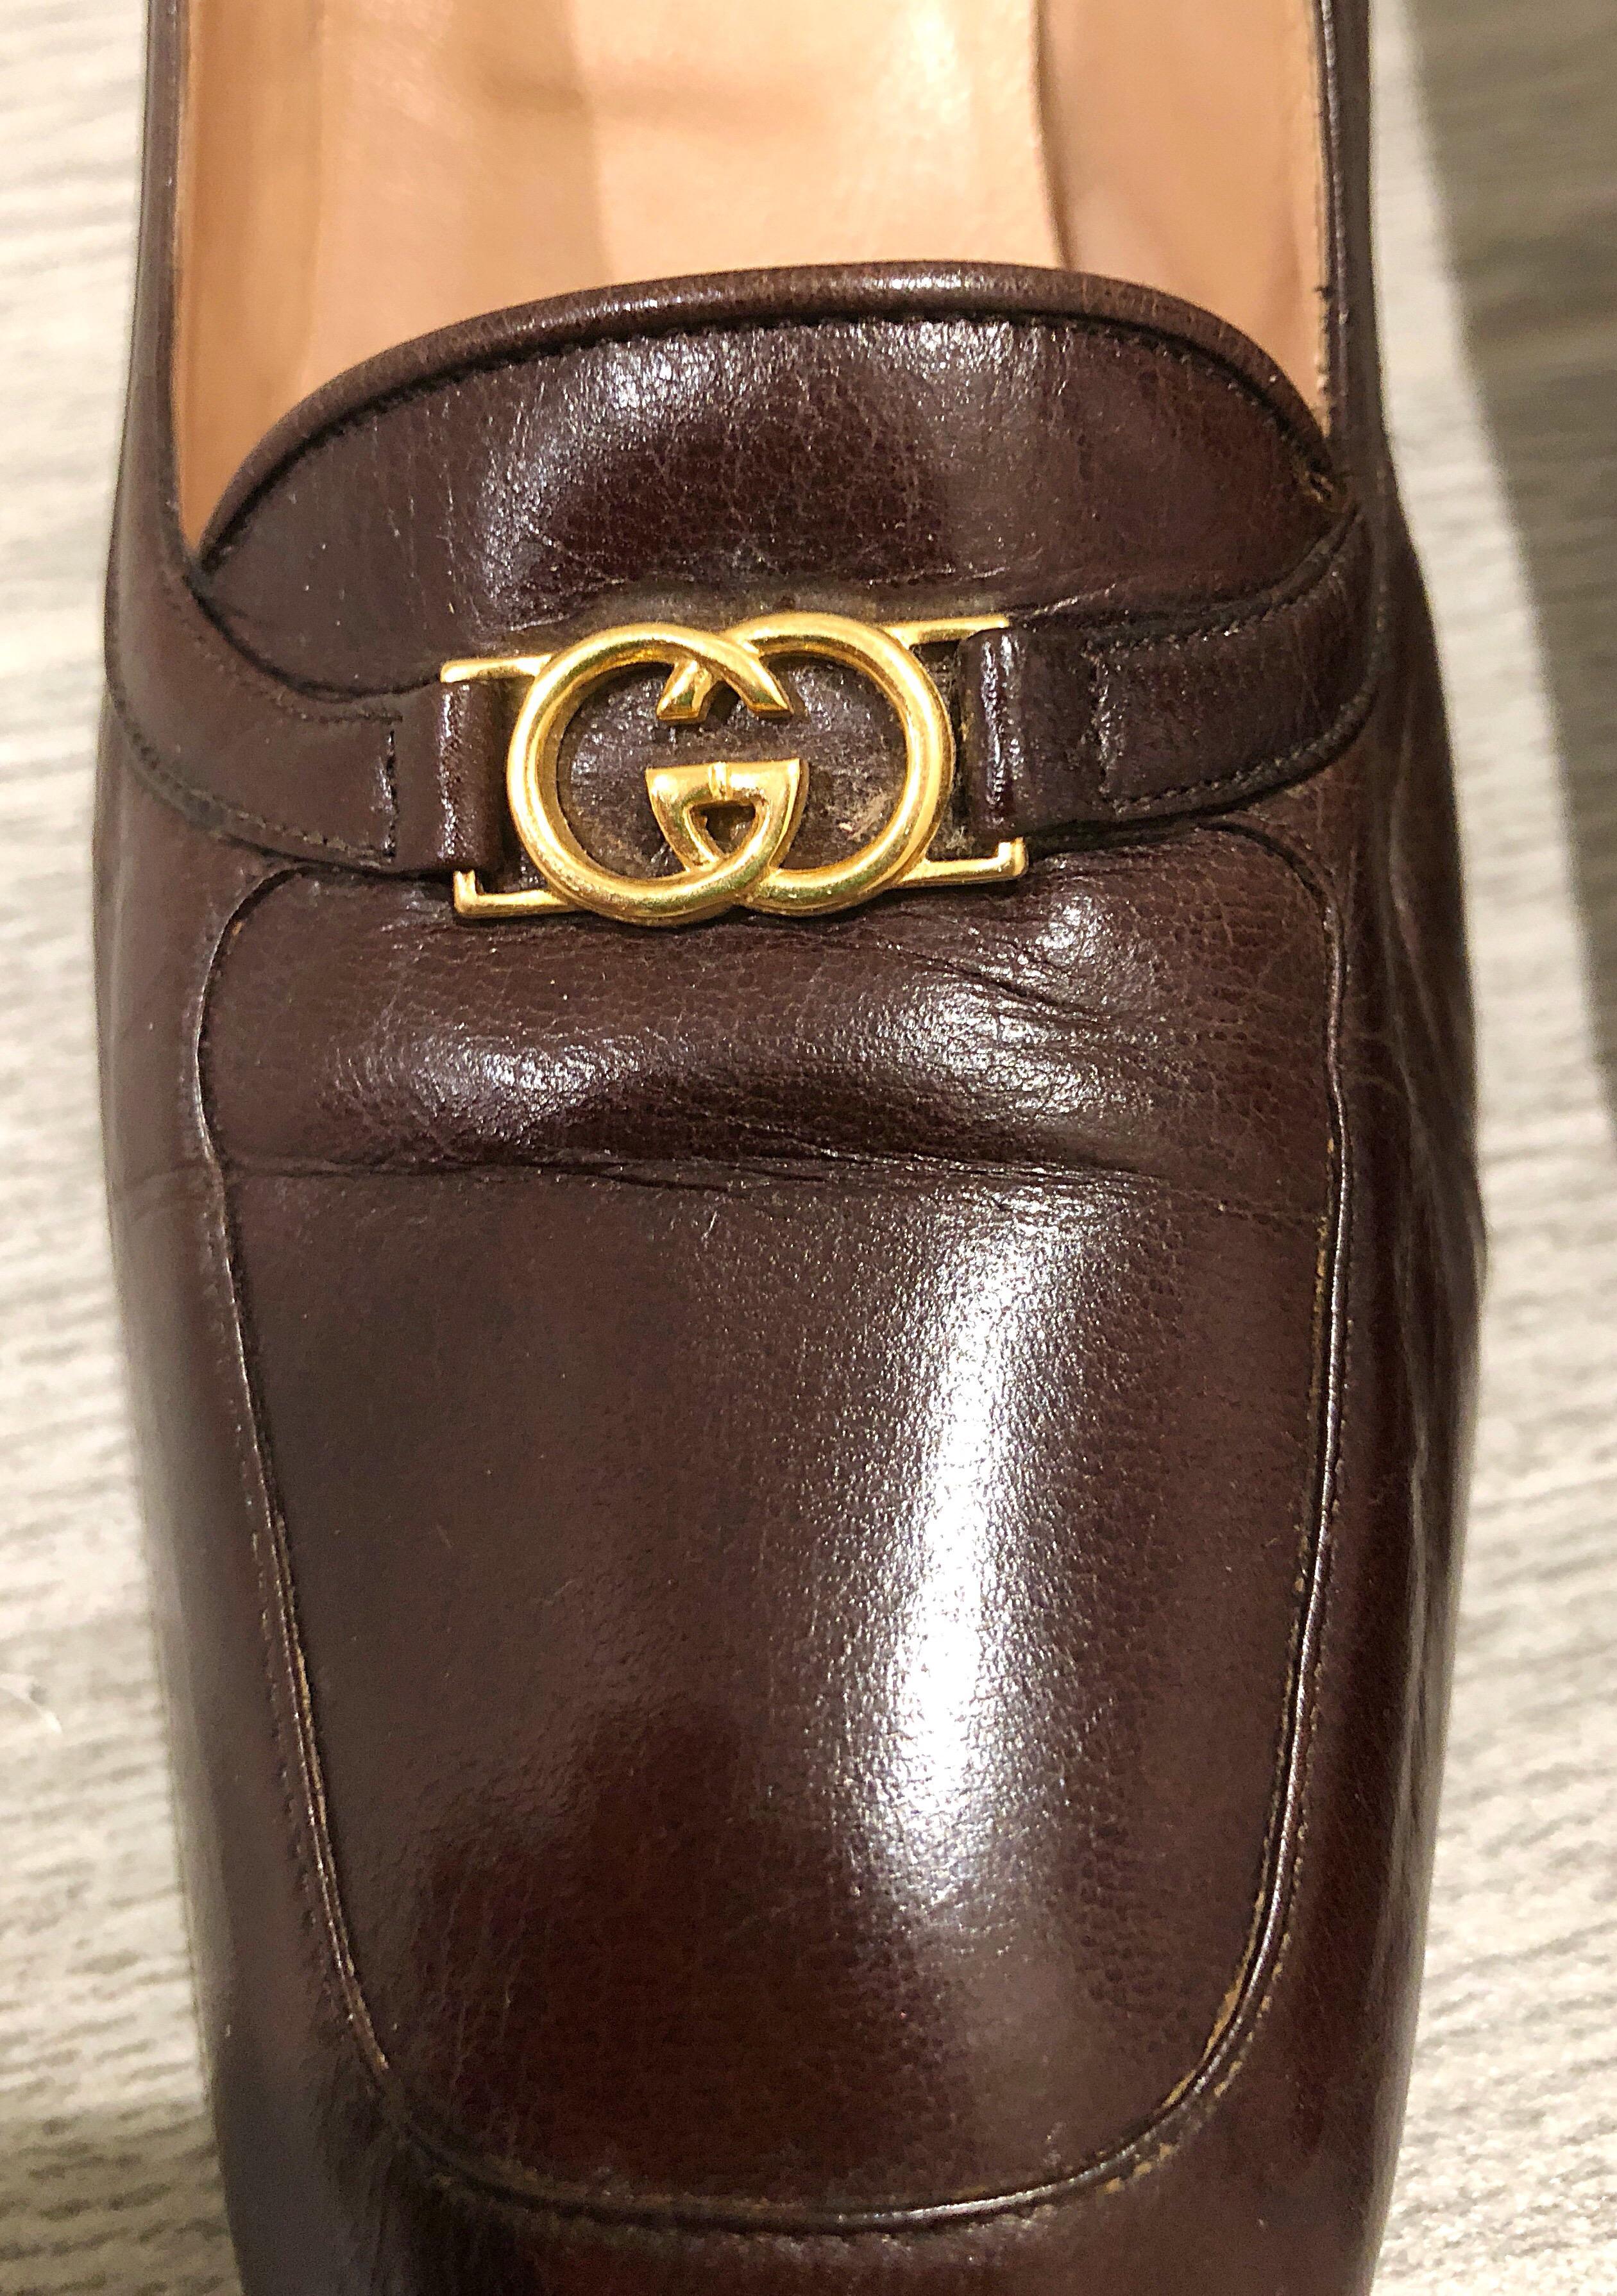 Rare 1970s Gucci Size 7.5 chocolate brown leather women’s high heel loafers! The perfect brown color that goes with anything. Gold GG logo detail on each shoe. Can easily be dressed up or down. Great with jeans, a dress, a suit, or skirt. In good